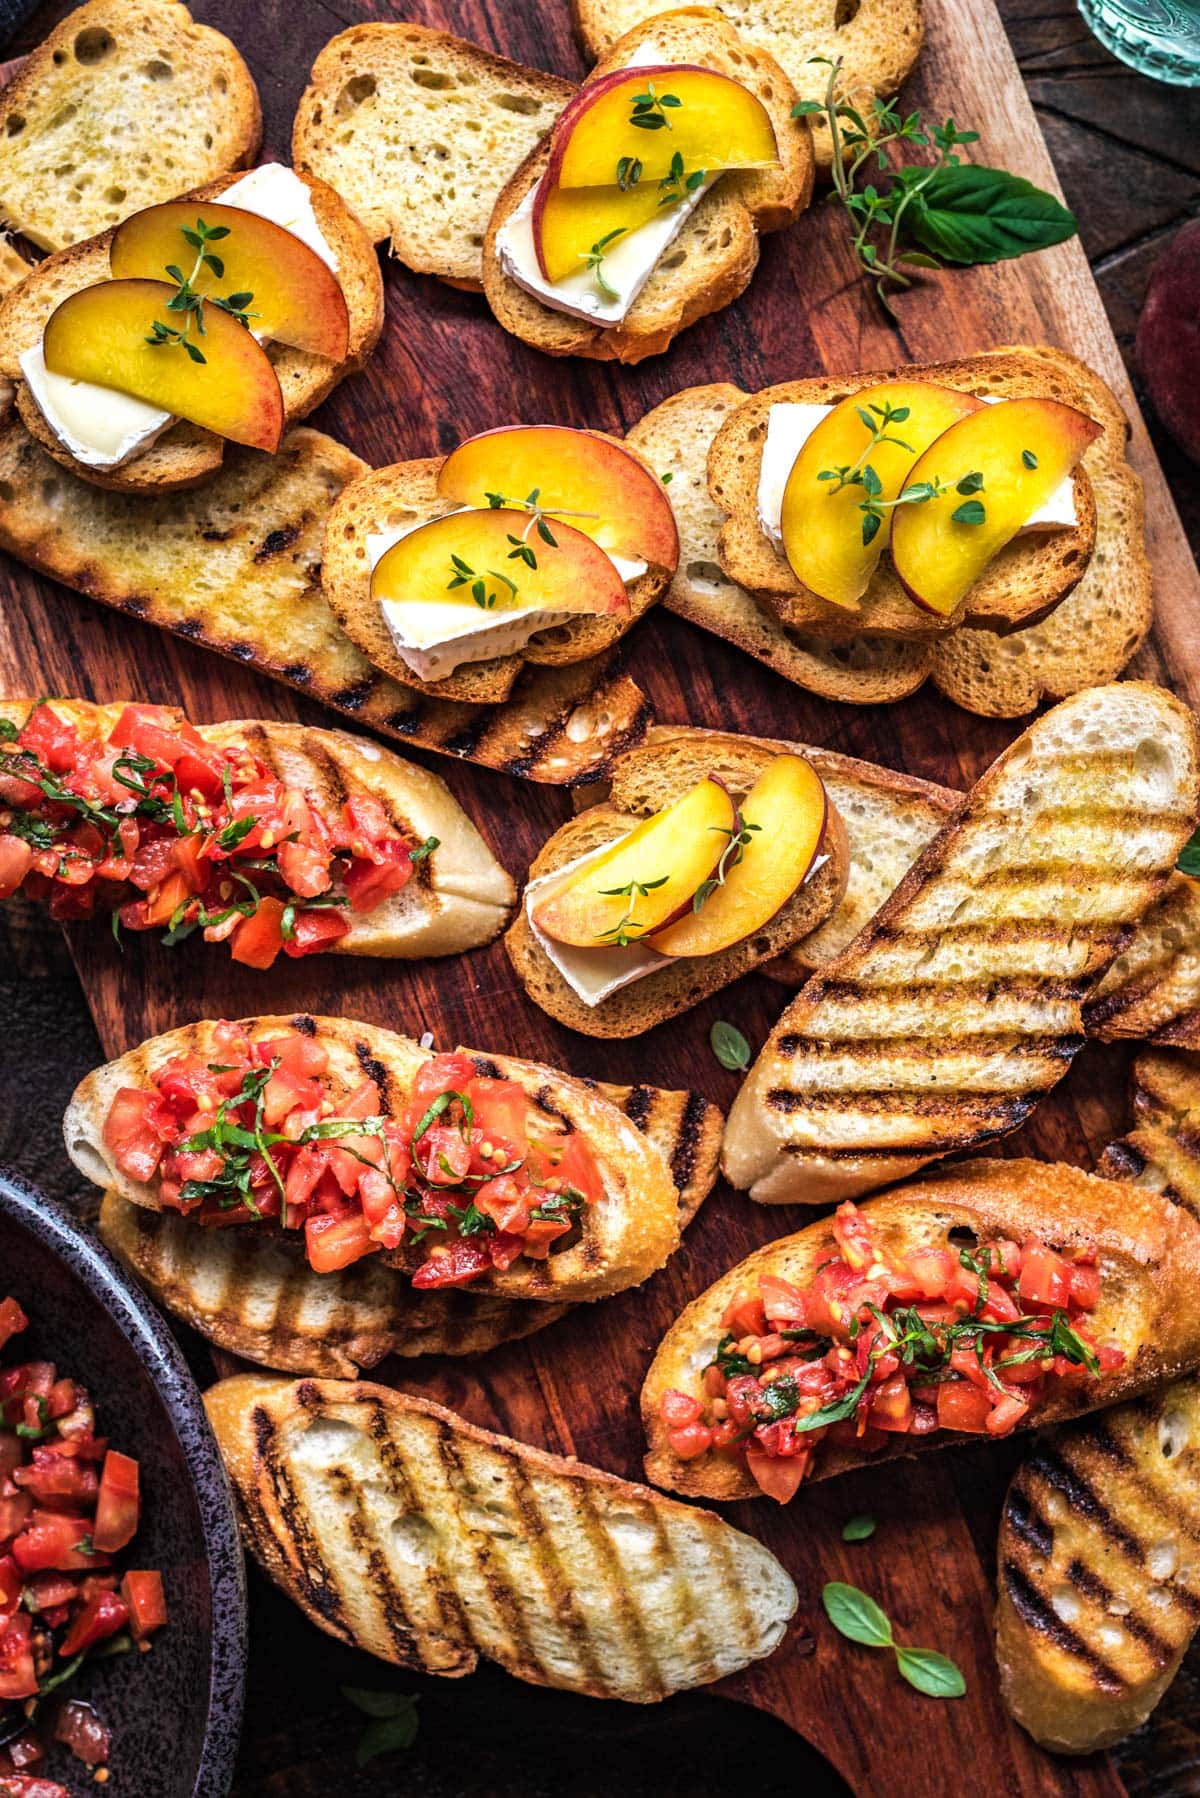 Various grilled and toasted slices of crostini and bruschetta are placed on a diagonally-laid wooden cutting board. Some of the crostini are topped with sliced brie, fresh peach slices, and thyme. Some of the bruschetta toasts are topped with a tomato-basil mixture.